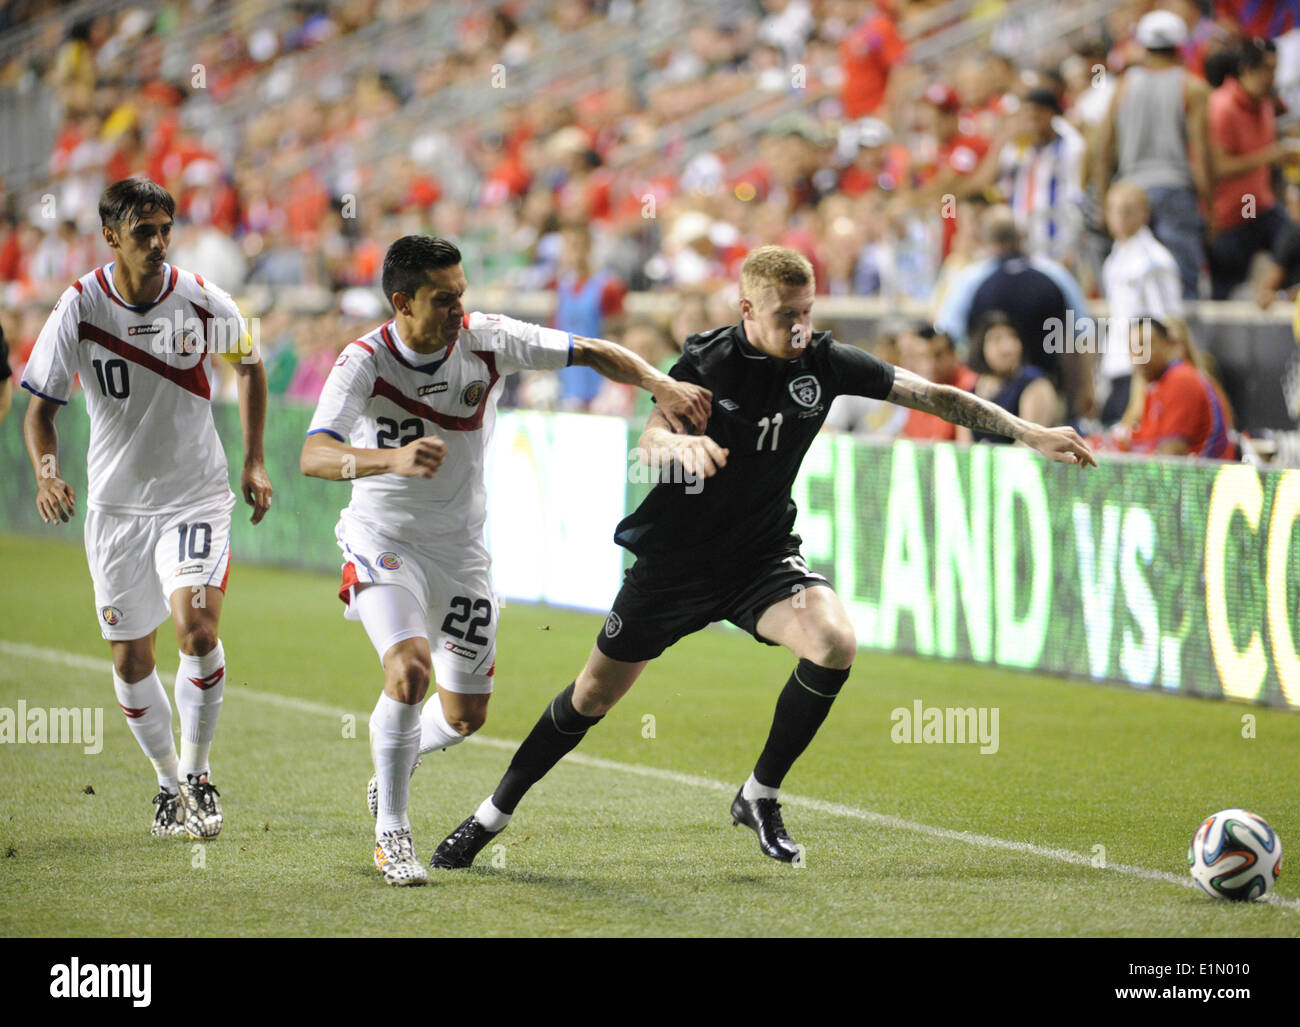 Chester, Pennsylvania, USA. 6th June, 2014. Costs Rica player, JOSE MIGUEL CUBERO (22) in action against Ireland player, JAMES MCCLEAN (1I) during the Freedom Cup match held at PPL Park in Chester Pa Credit:  Ricky Fitchett/ZUMAPRESS.com/Alamy Live News Stock Photo